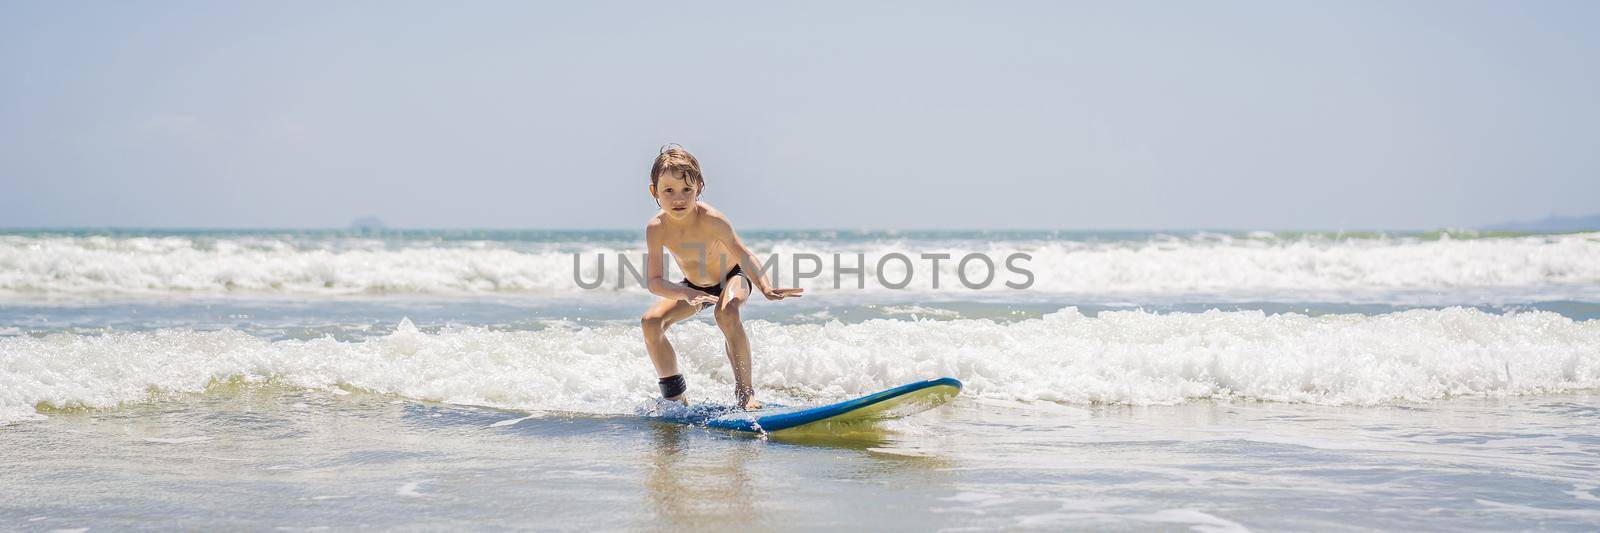 Healthy young boy learning to surf in the sea or ocean. BANNER, LONG FORMAT